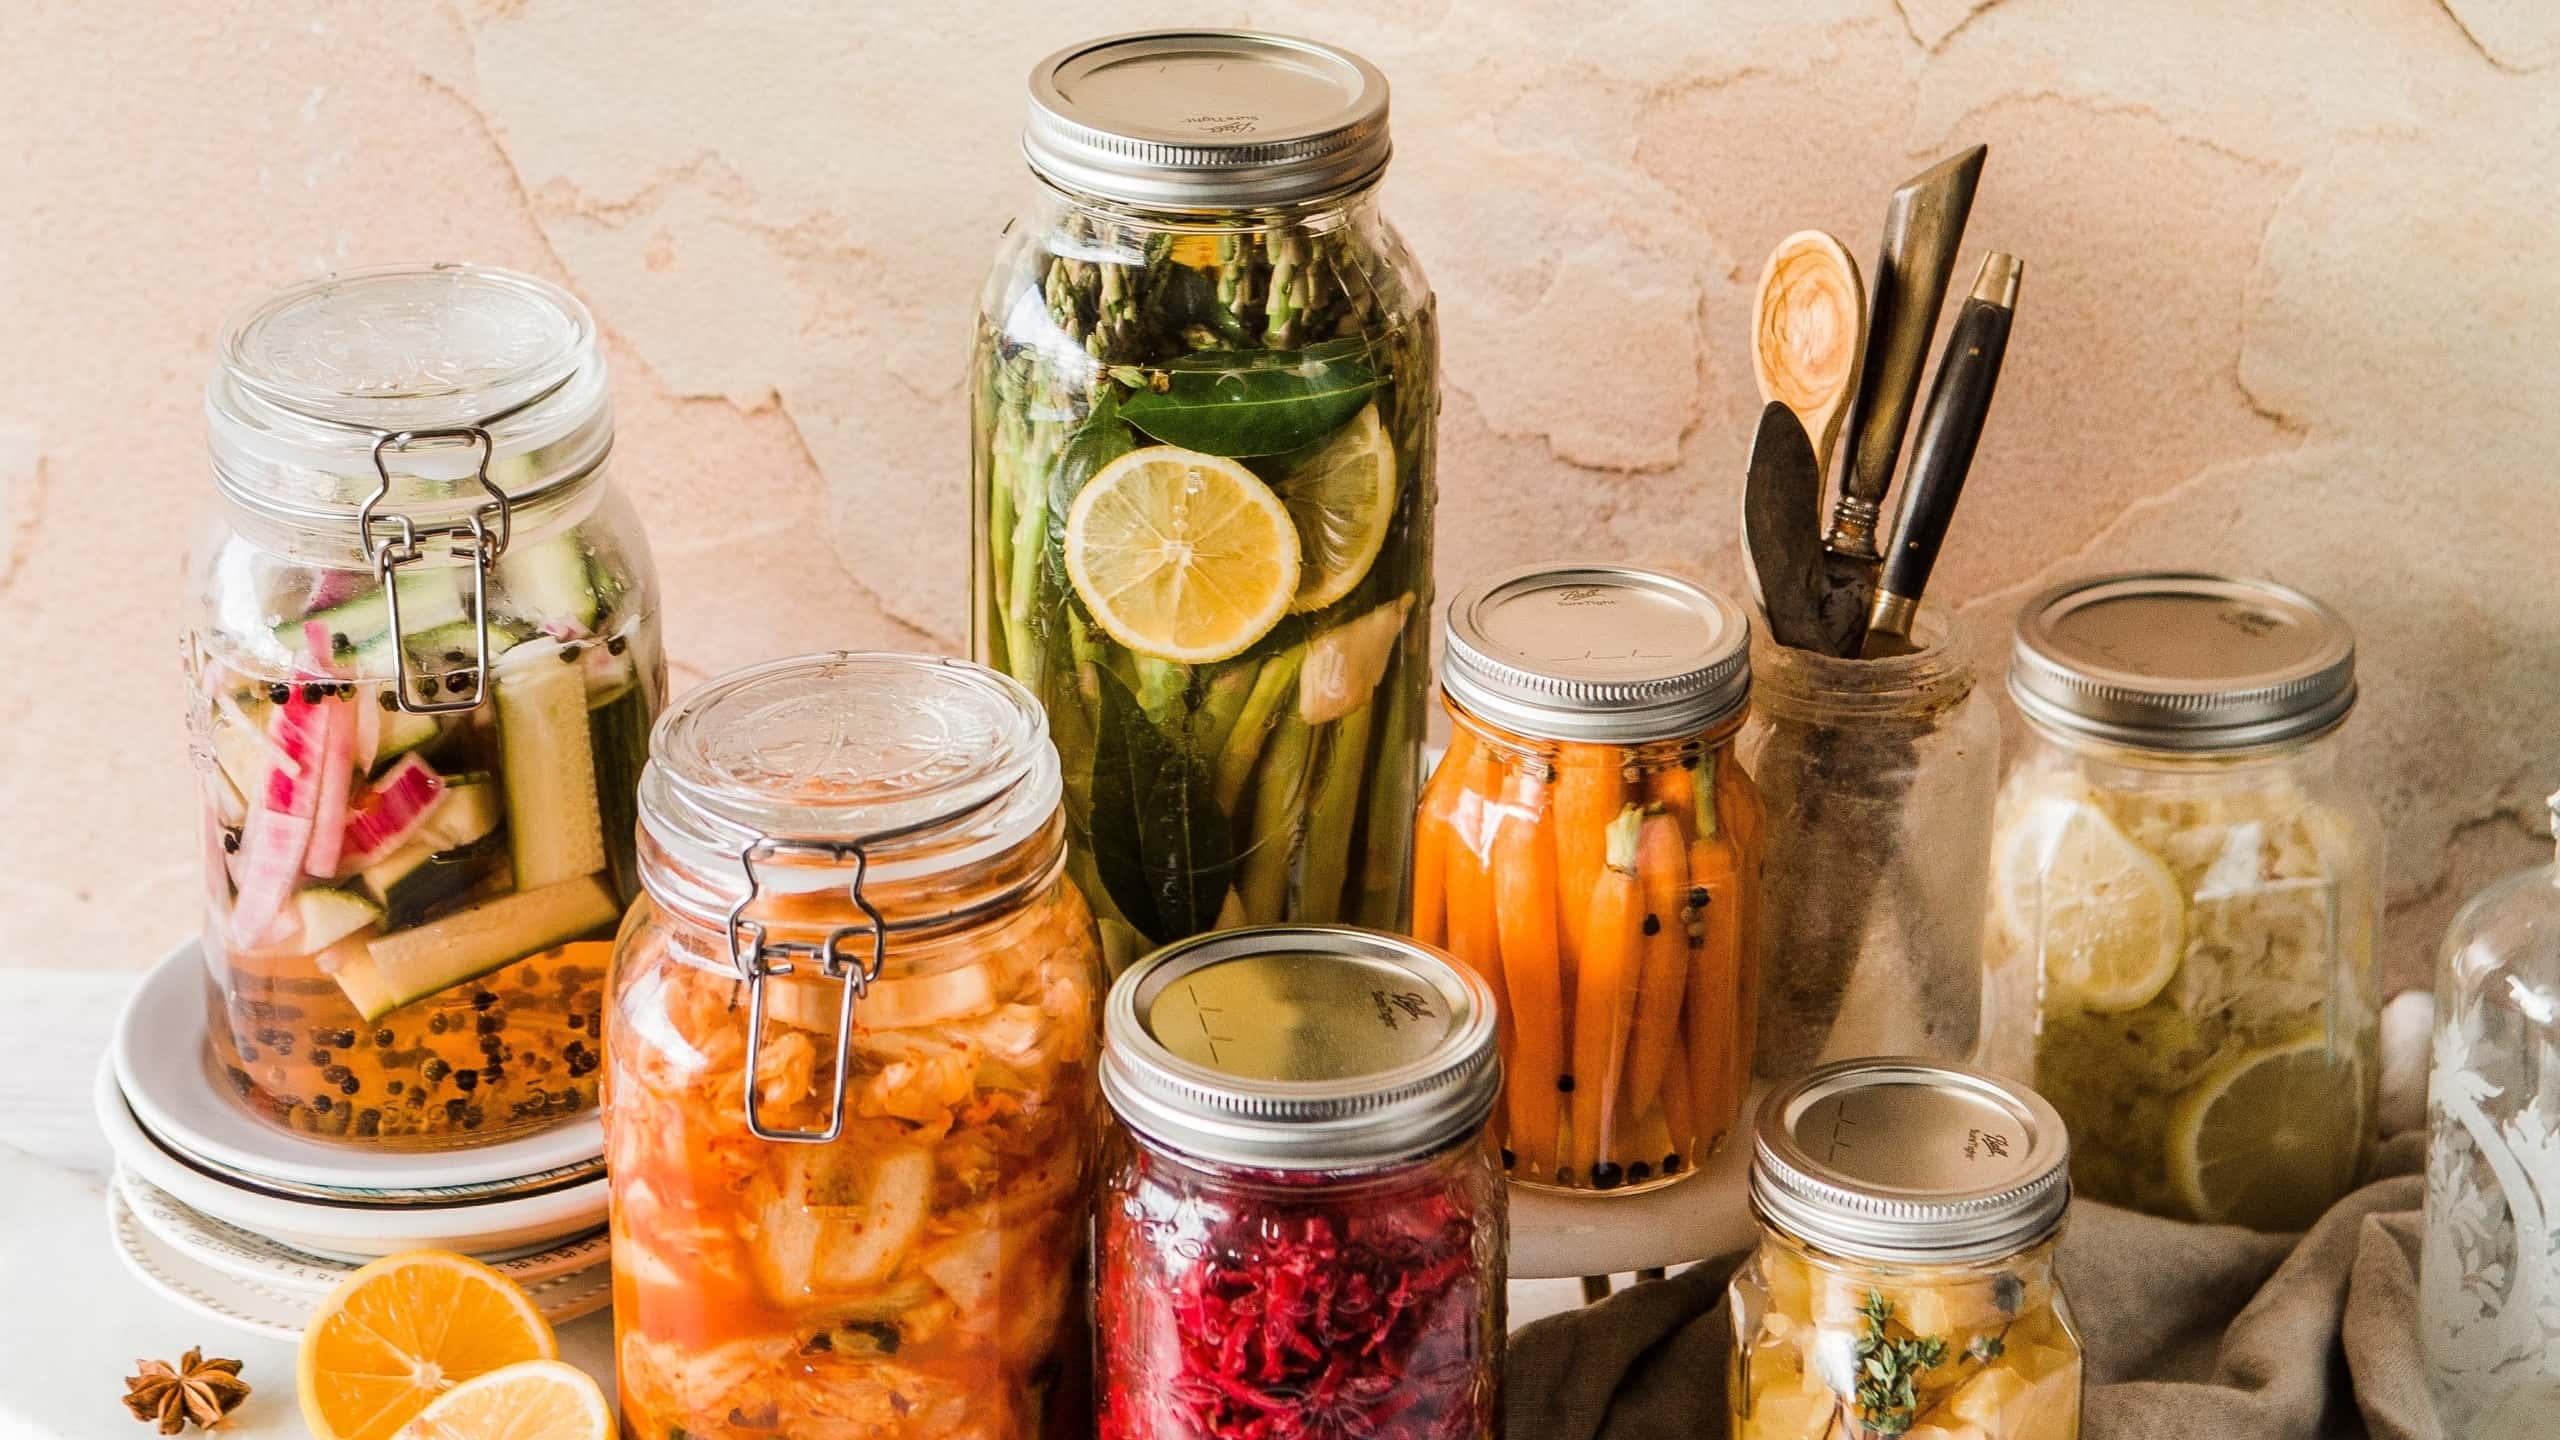 Mason jars with several pickles (cucumber, asparagus, carrots, kale) on a kitchen counter.